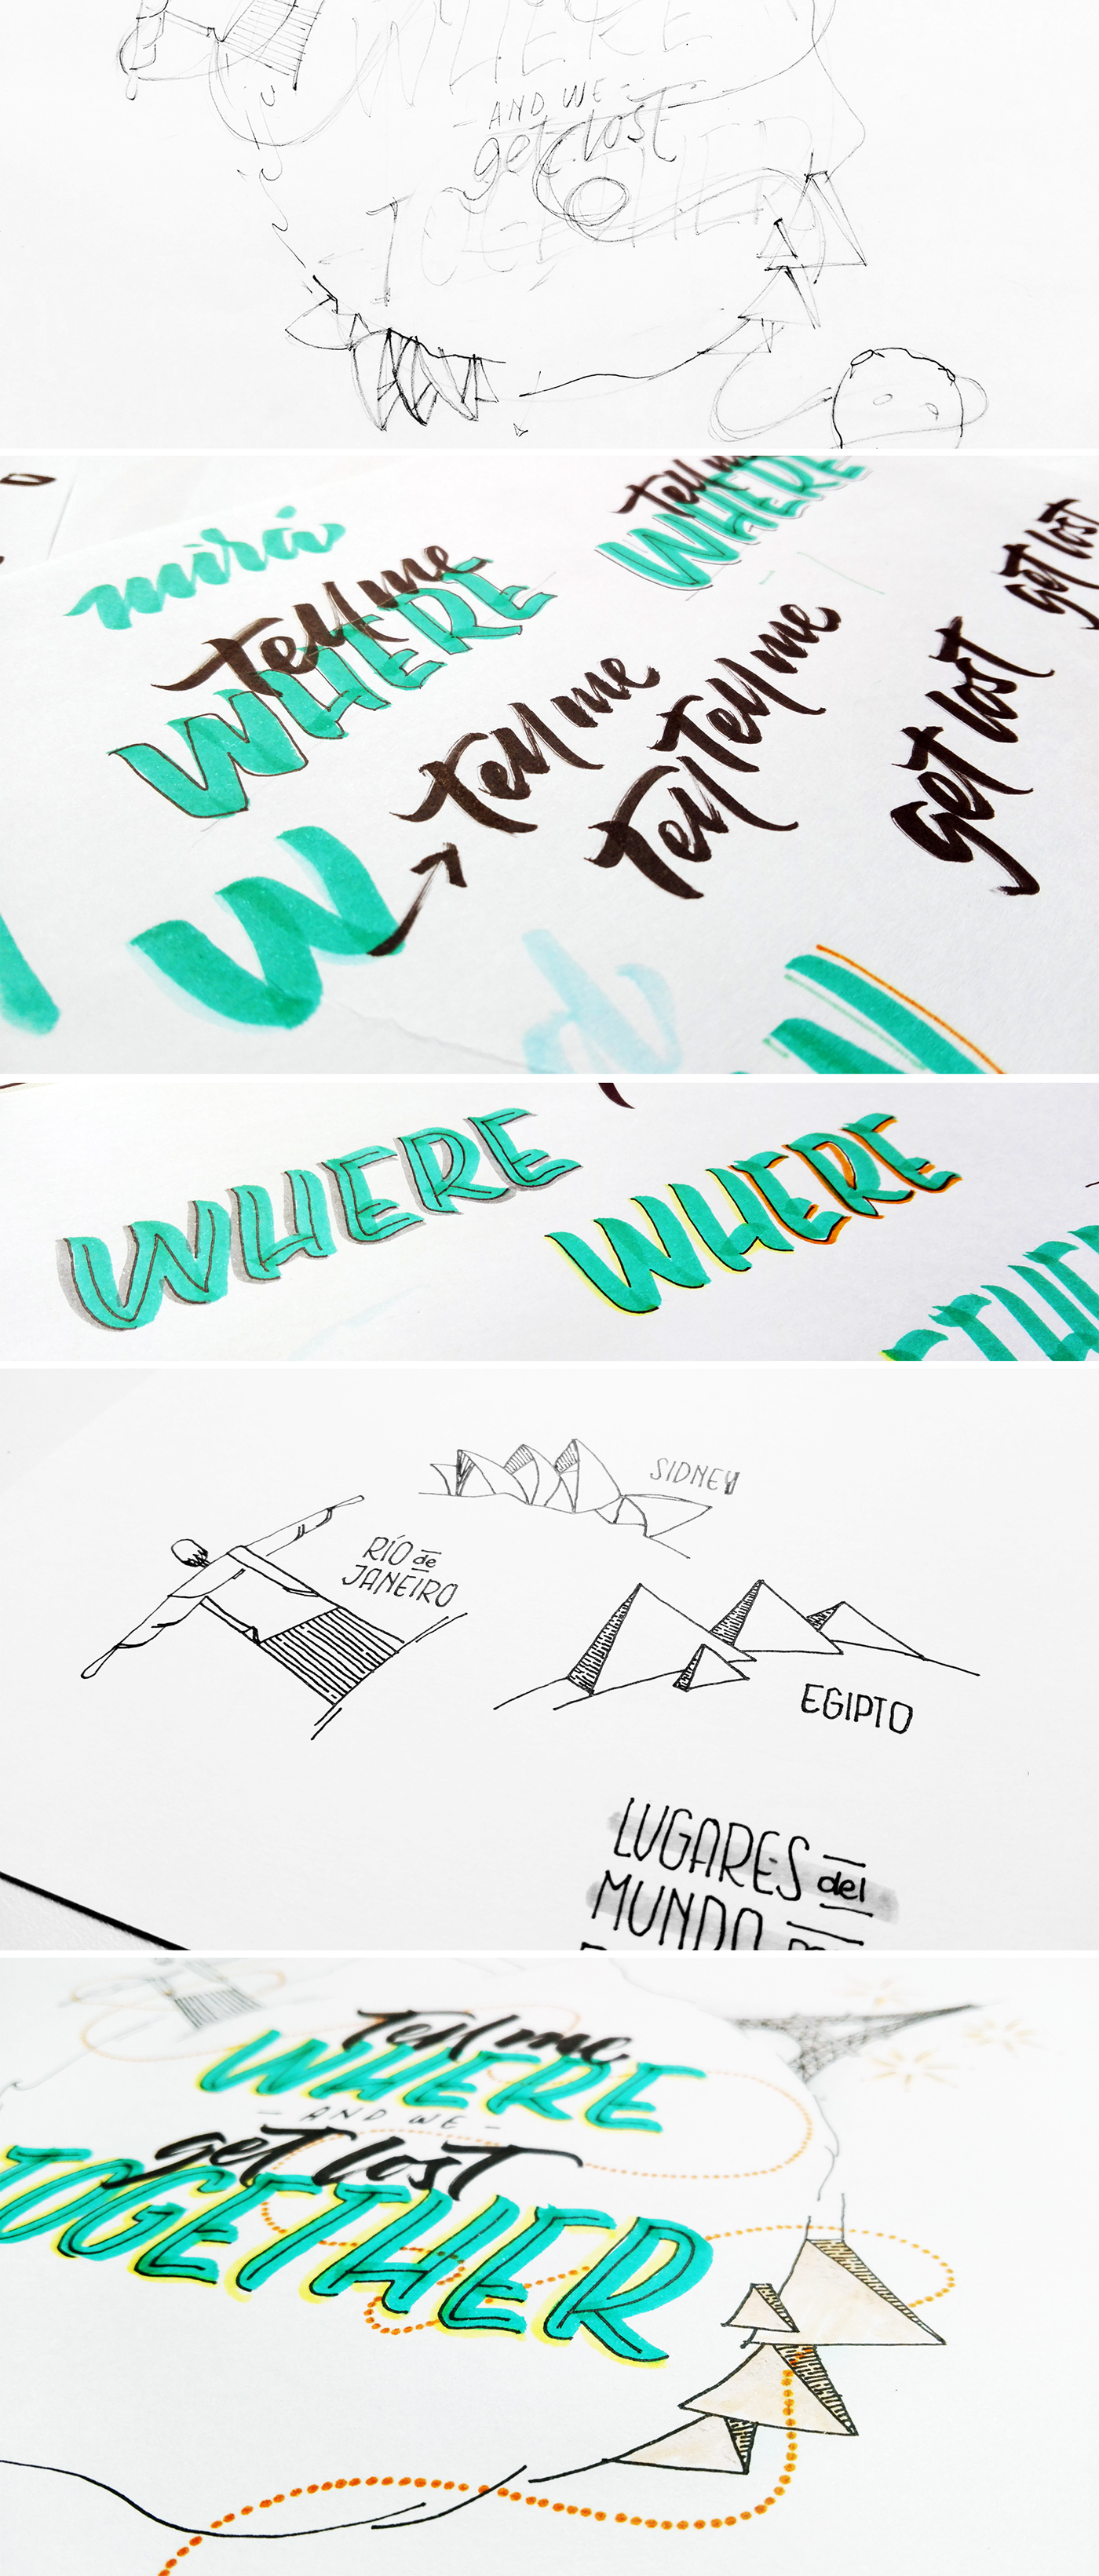 poster lettering brush pen trip vacations Travel world places of the frame